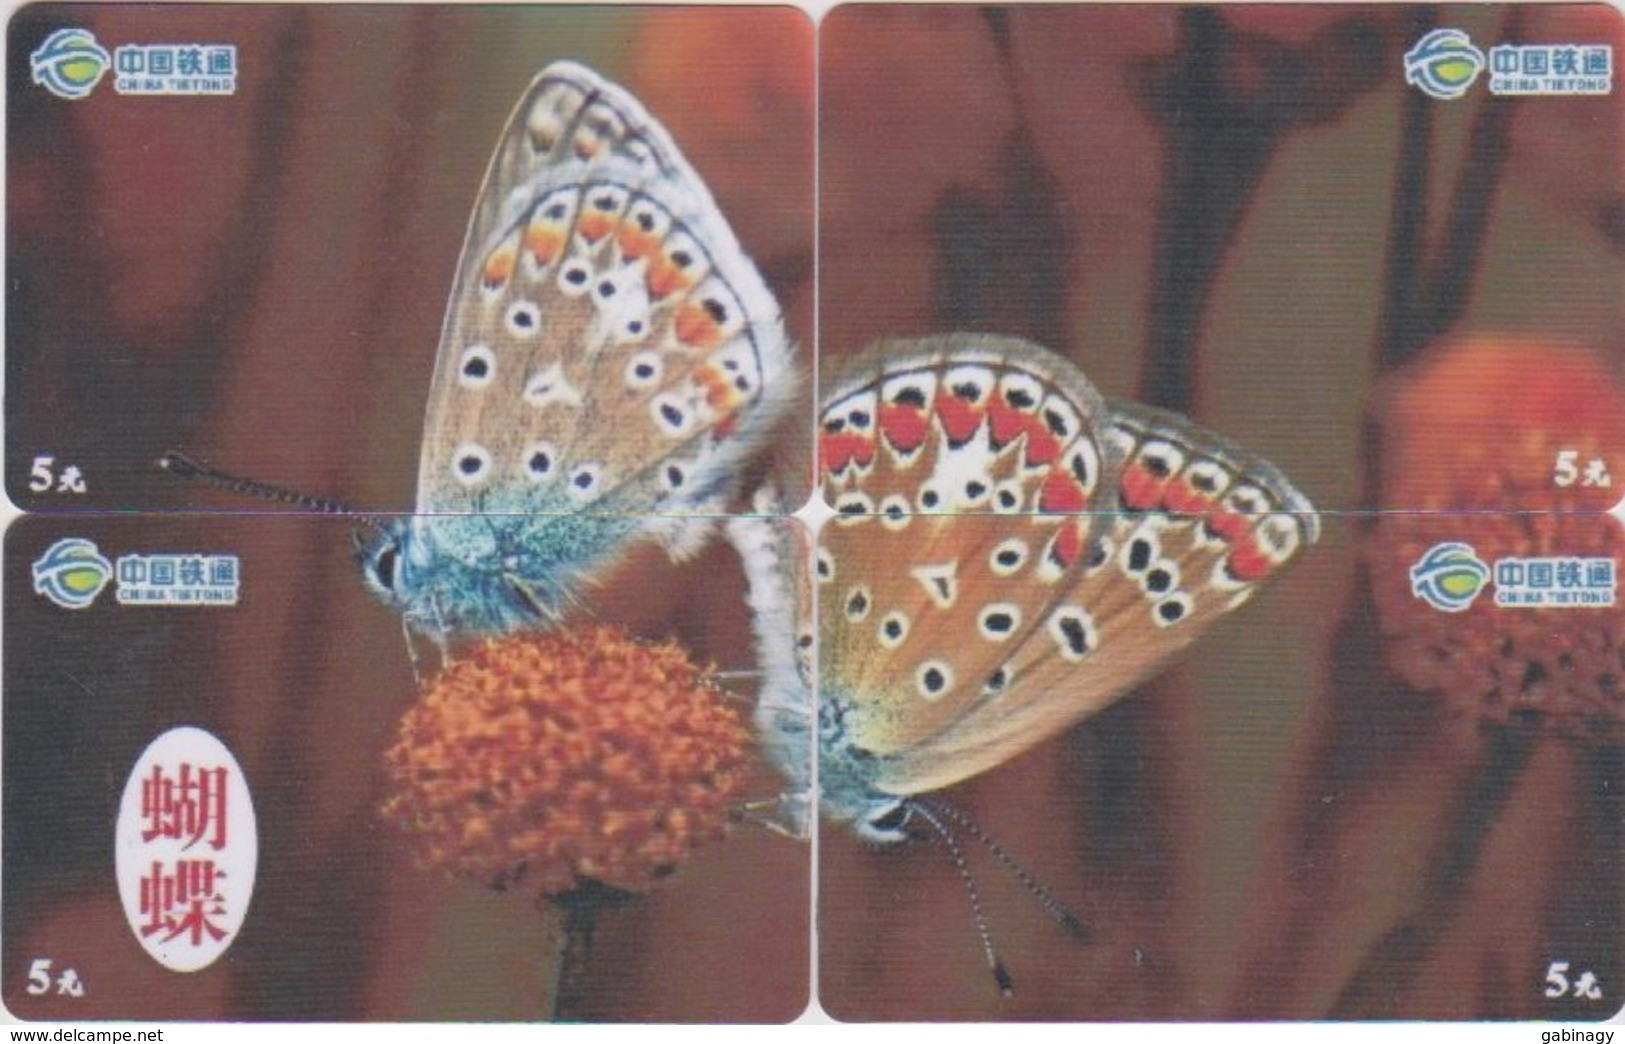 CHINA - BUTTERFLY-09 - SET OF 4 CARDS - China